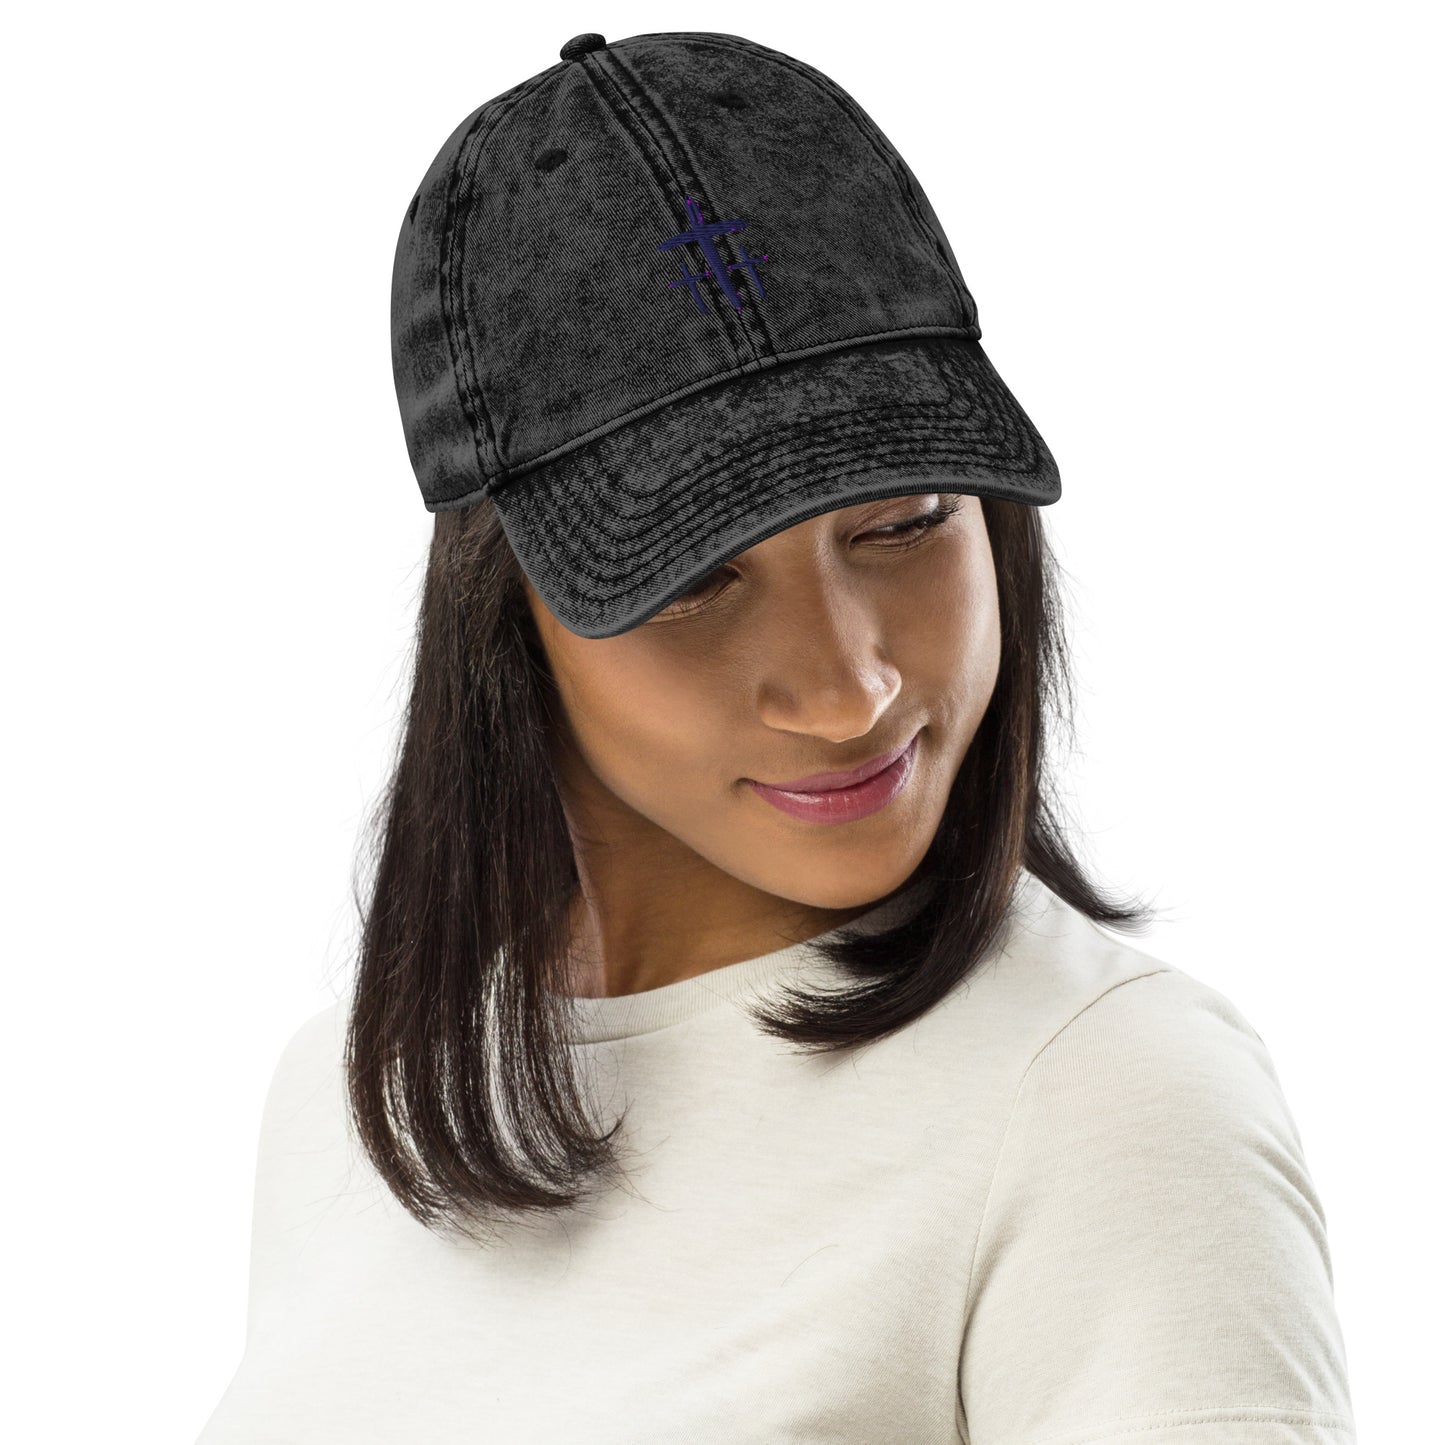 An Angel Feathers Original - Three Crosses - Embroidered Cotton Twill Cap